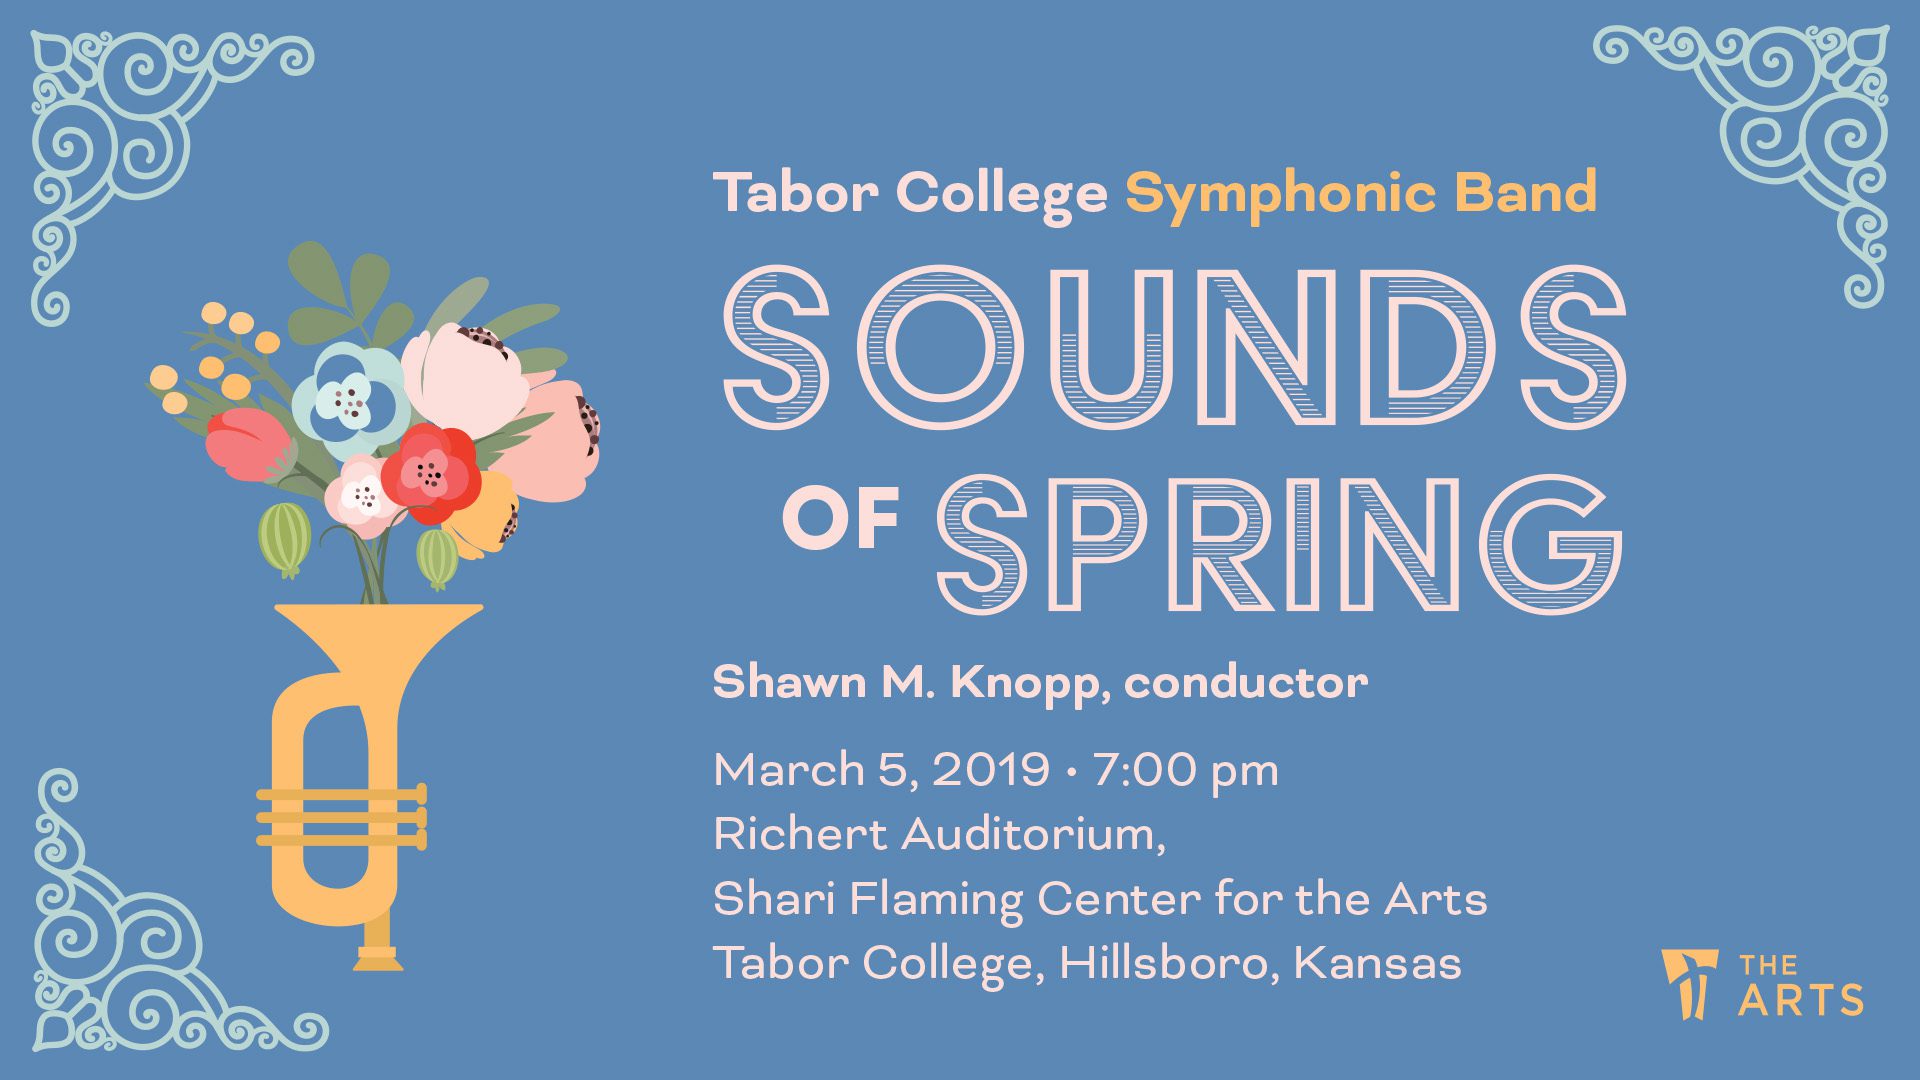 Sounds of Spring concert poster